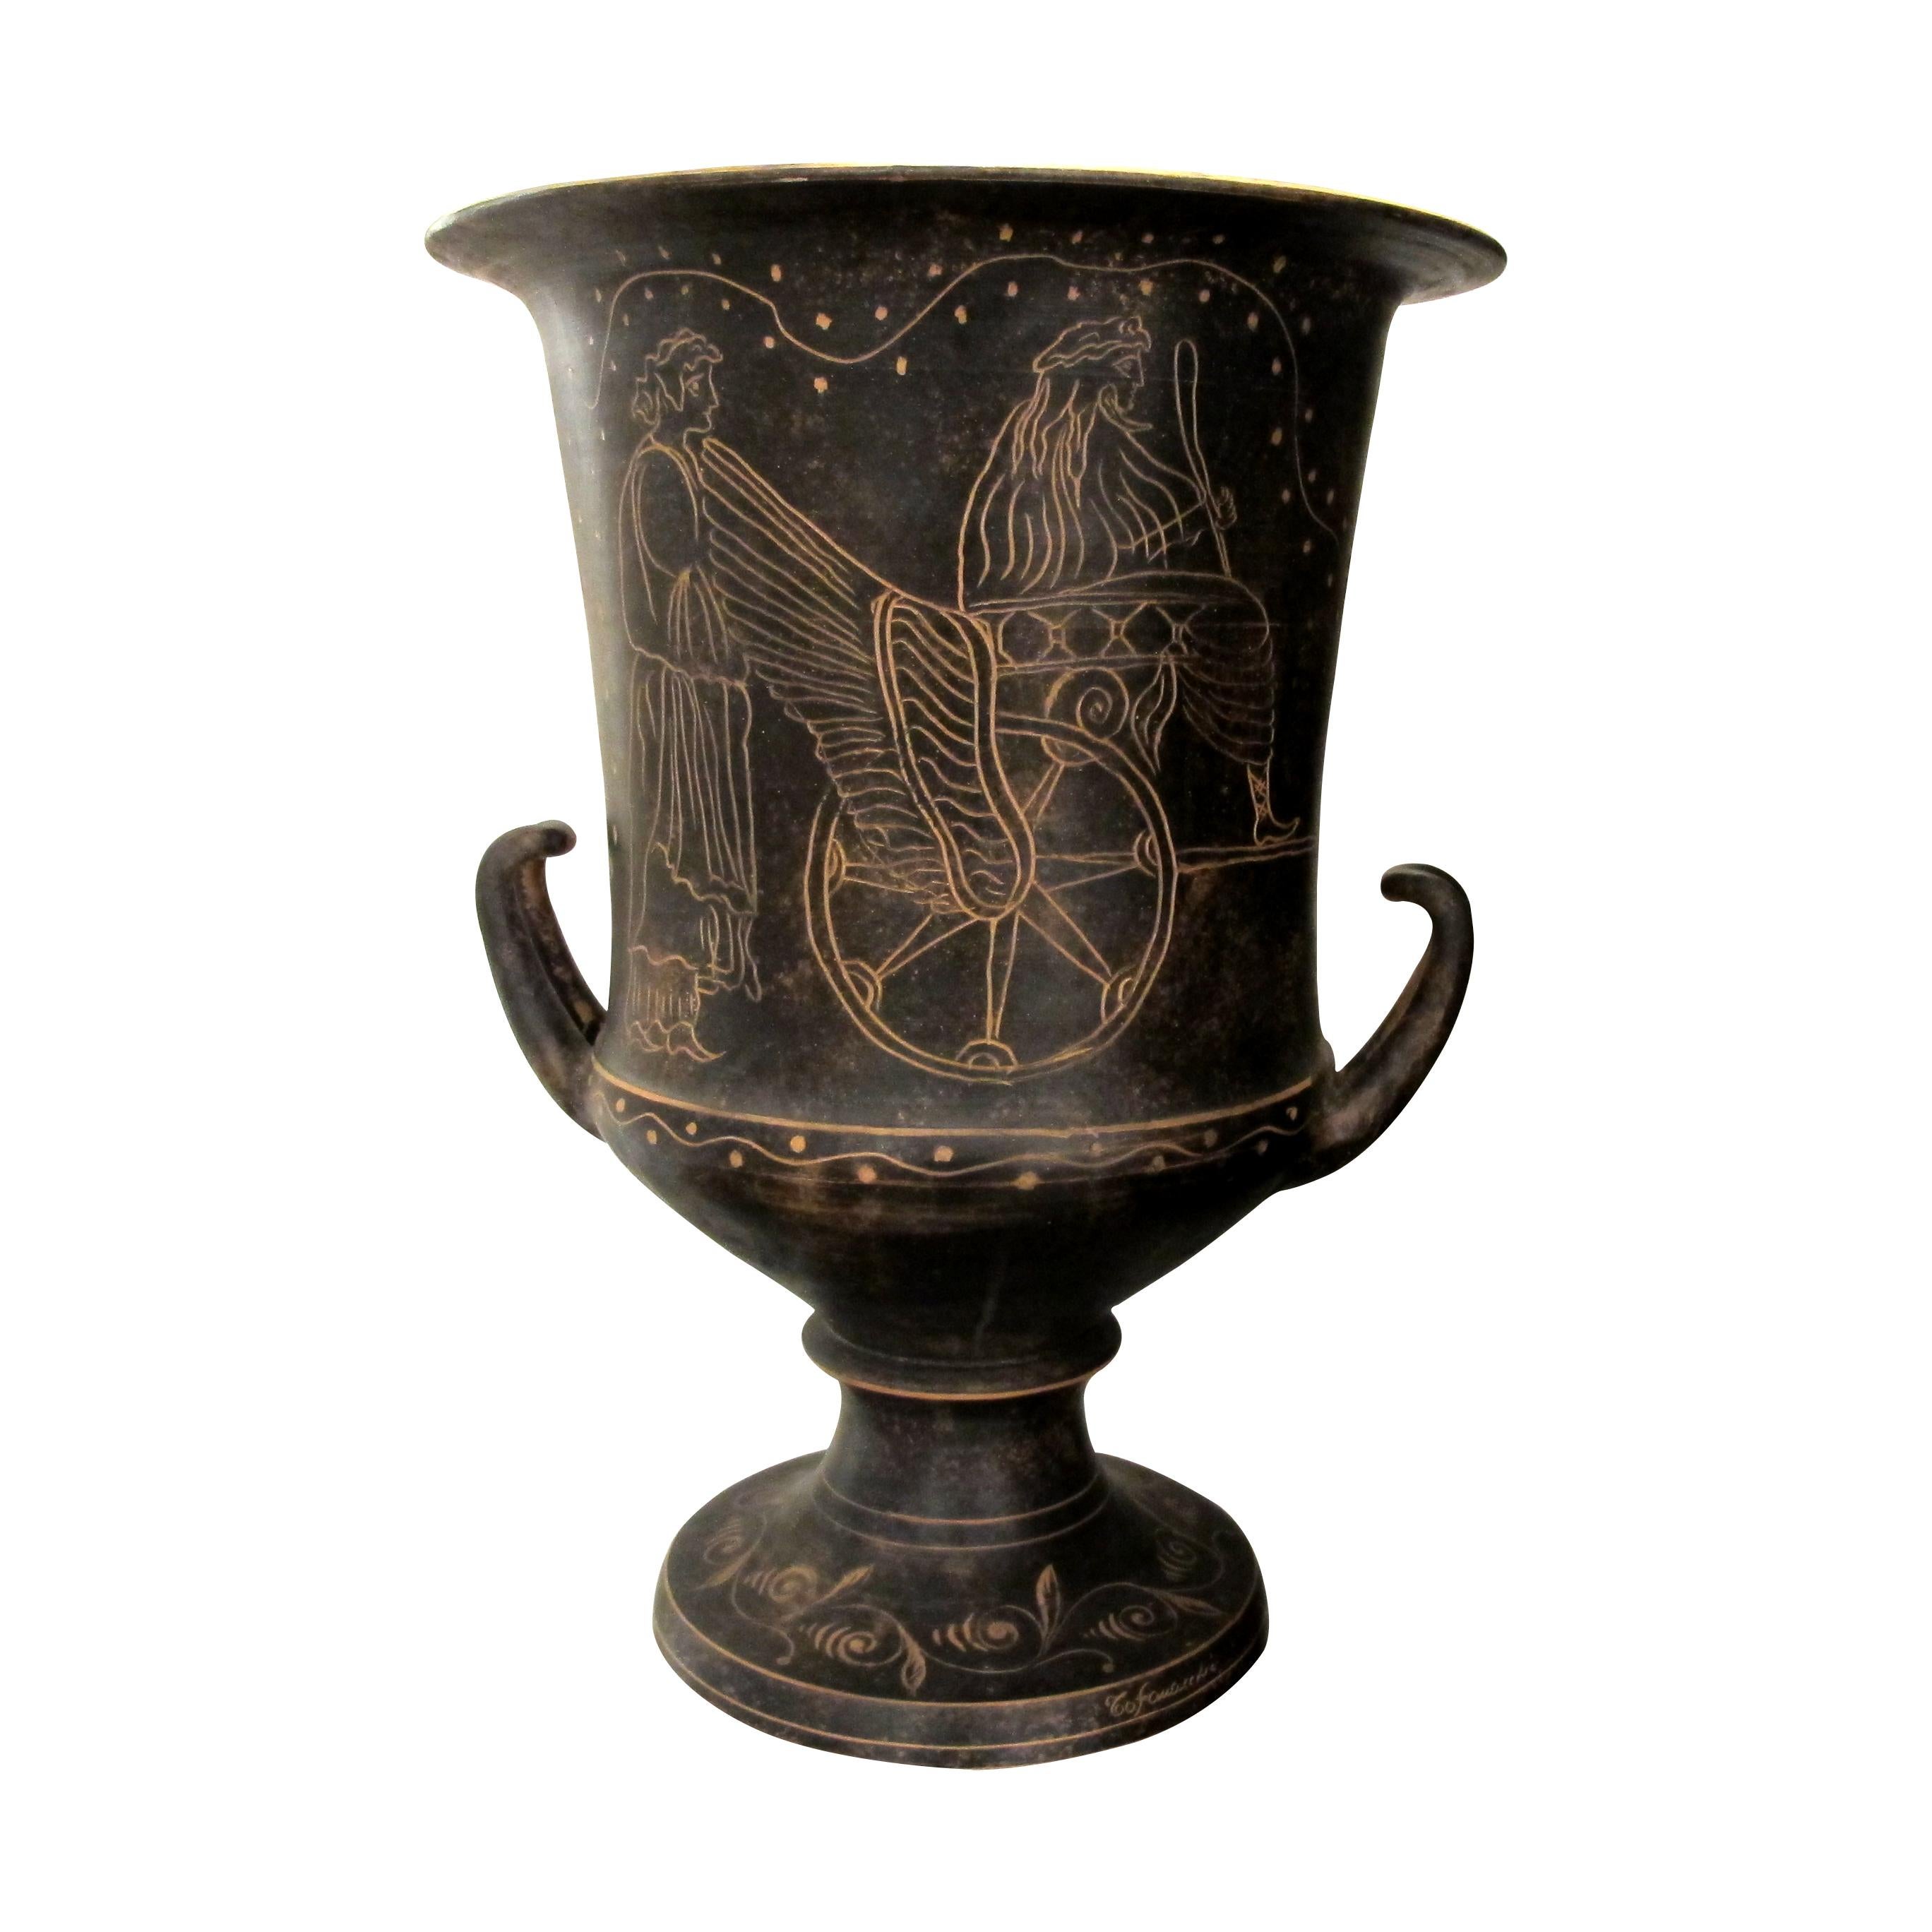 This is a magnificent set of 7 highly decorative early 20th century Etruscan vases which are also known as black-figure pottery painting. Figures and ornaments were painted on the body of the vessel using shapes and colours reminiscent of